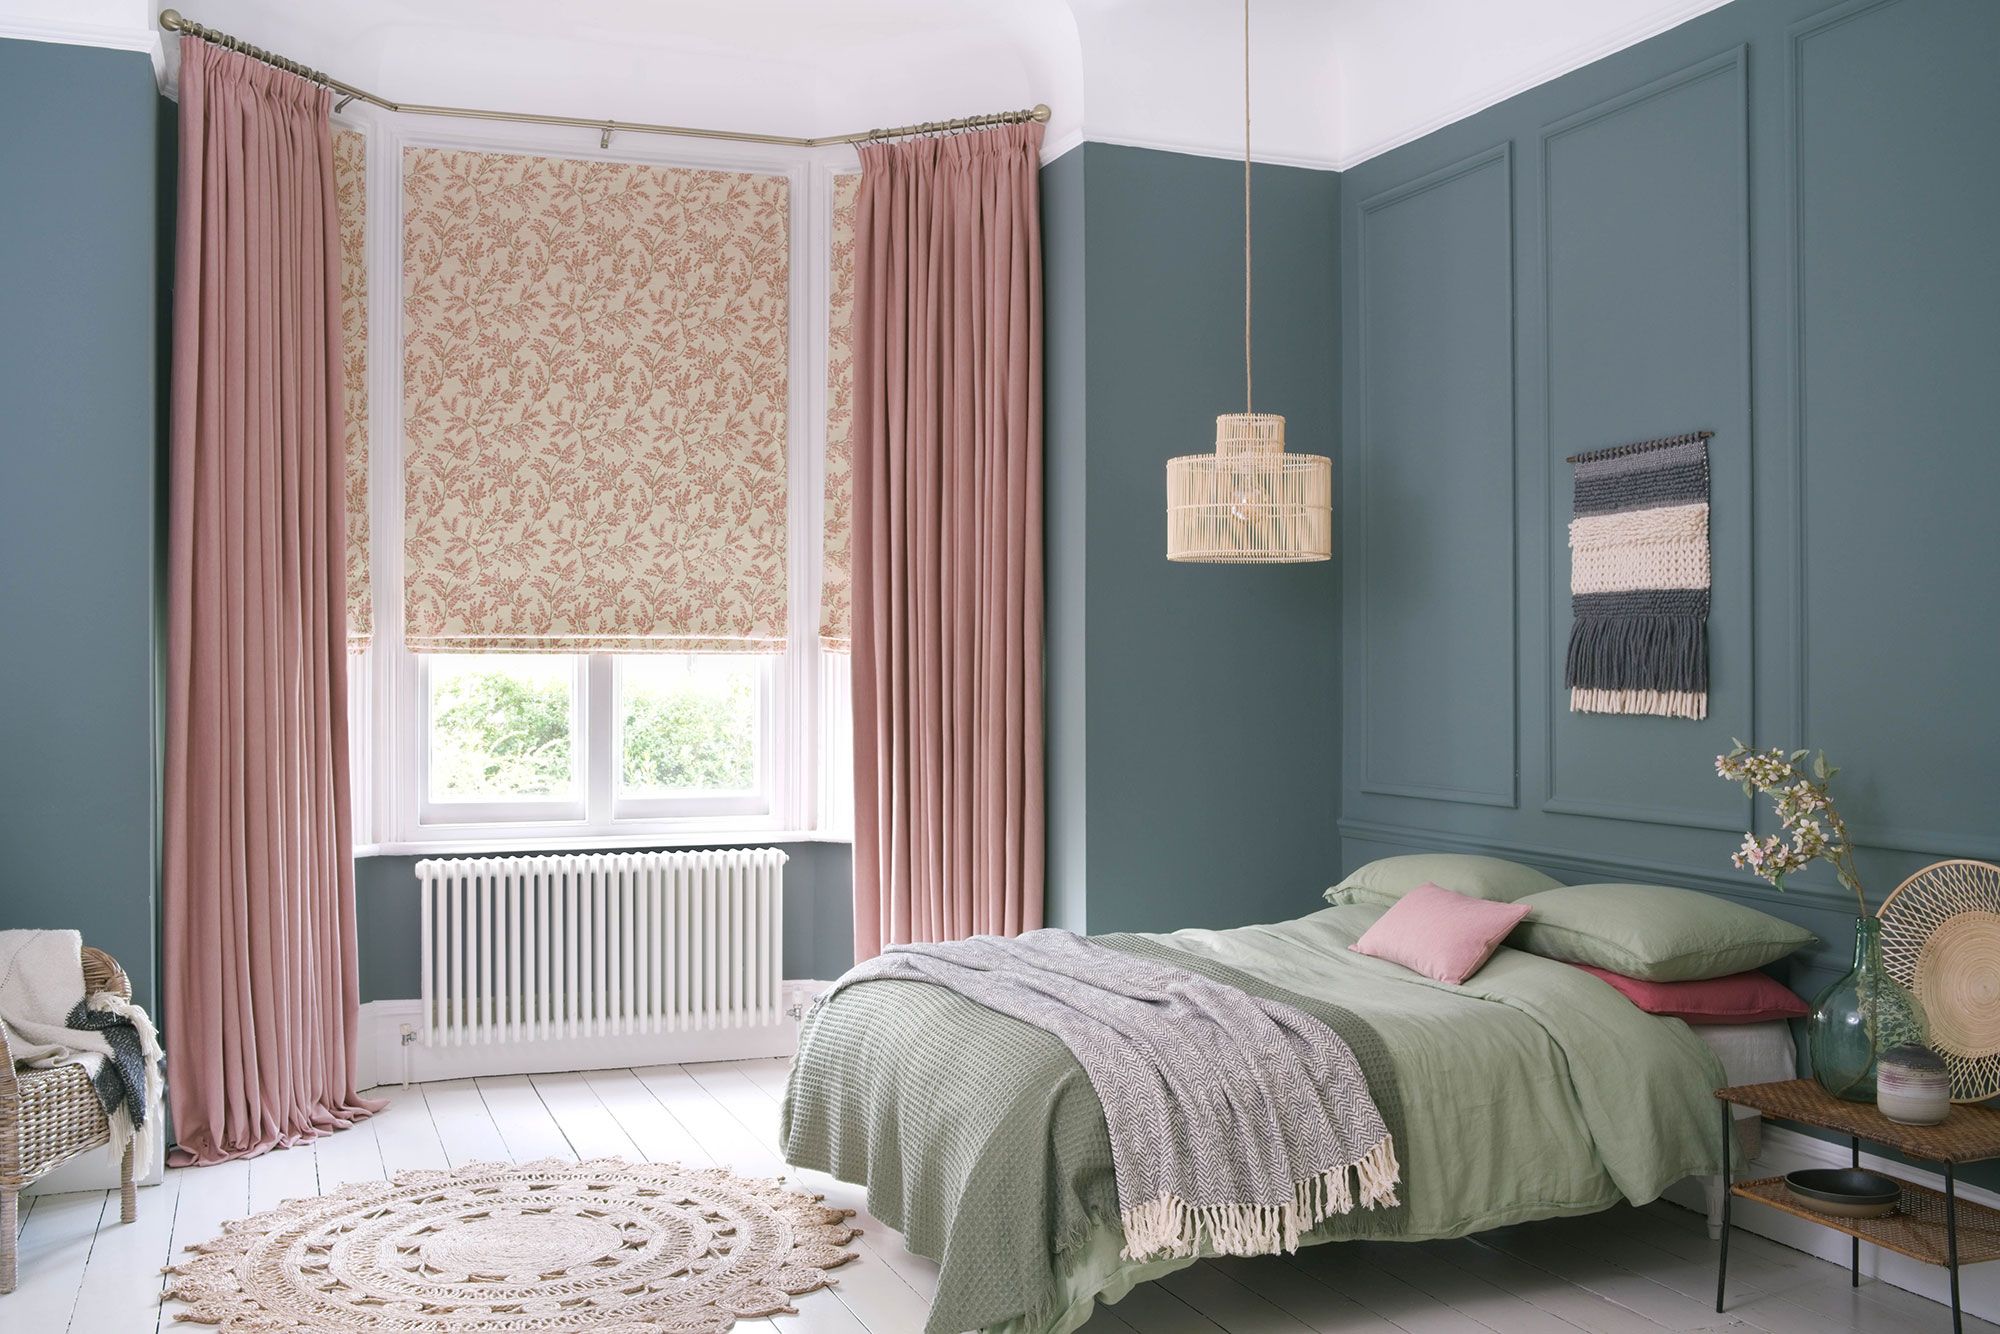 Bedroom Curtains Made To Measure In, Curtains For Bedrooms